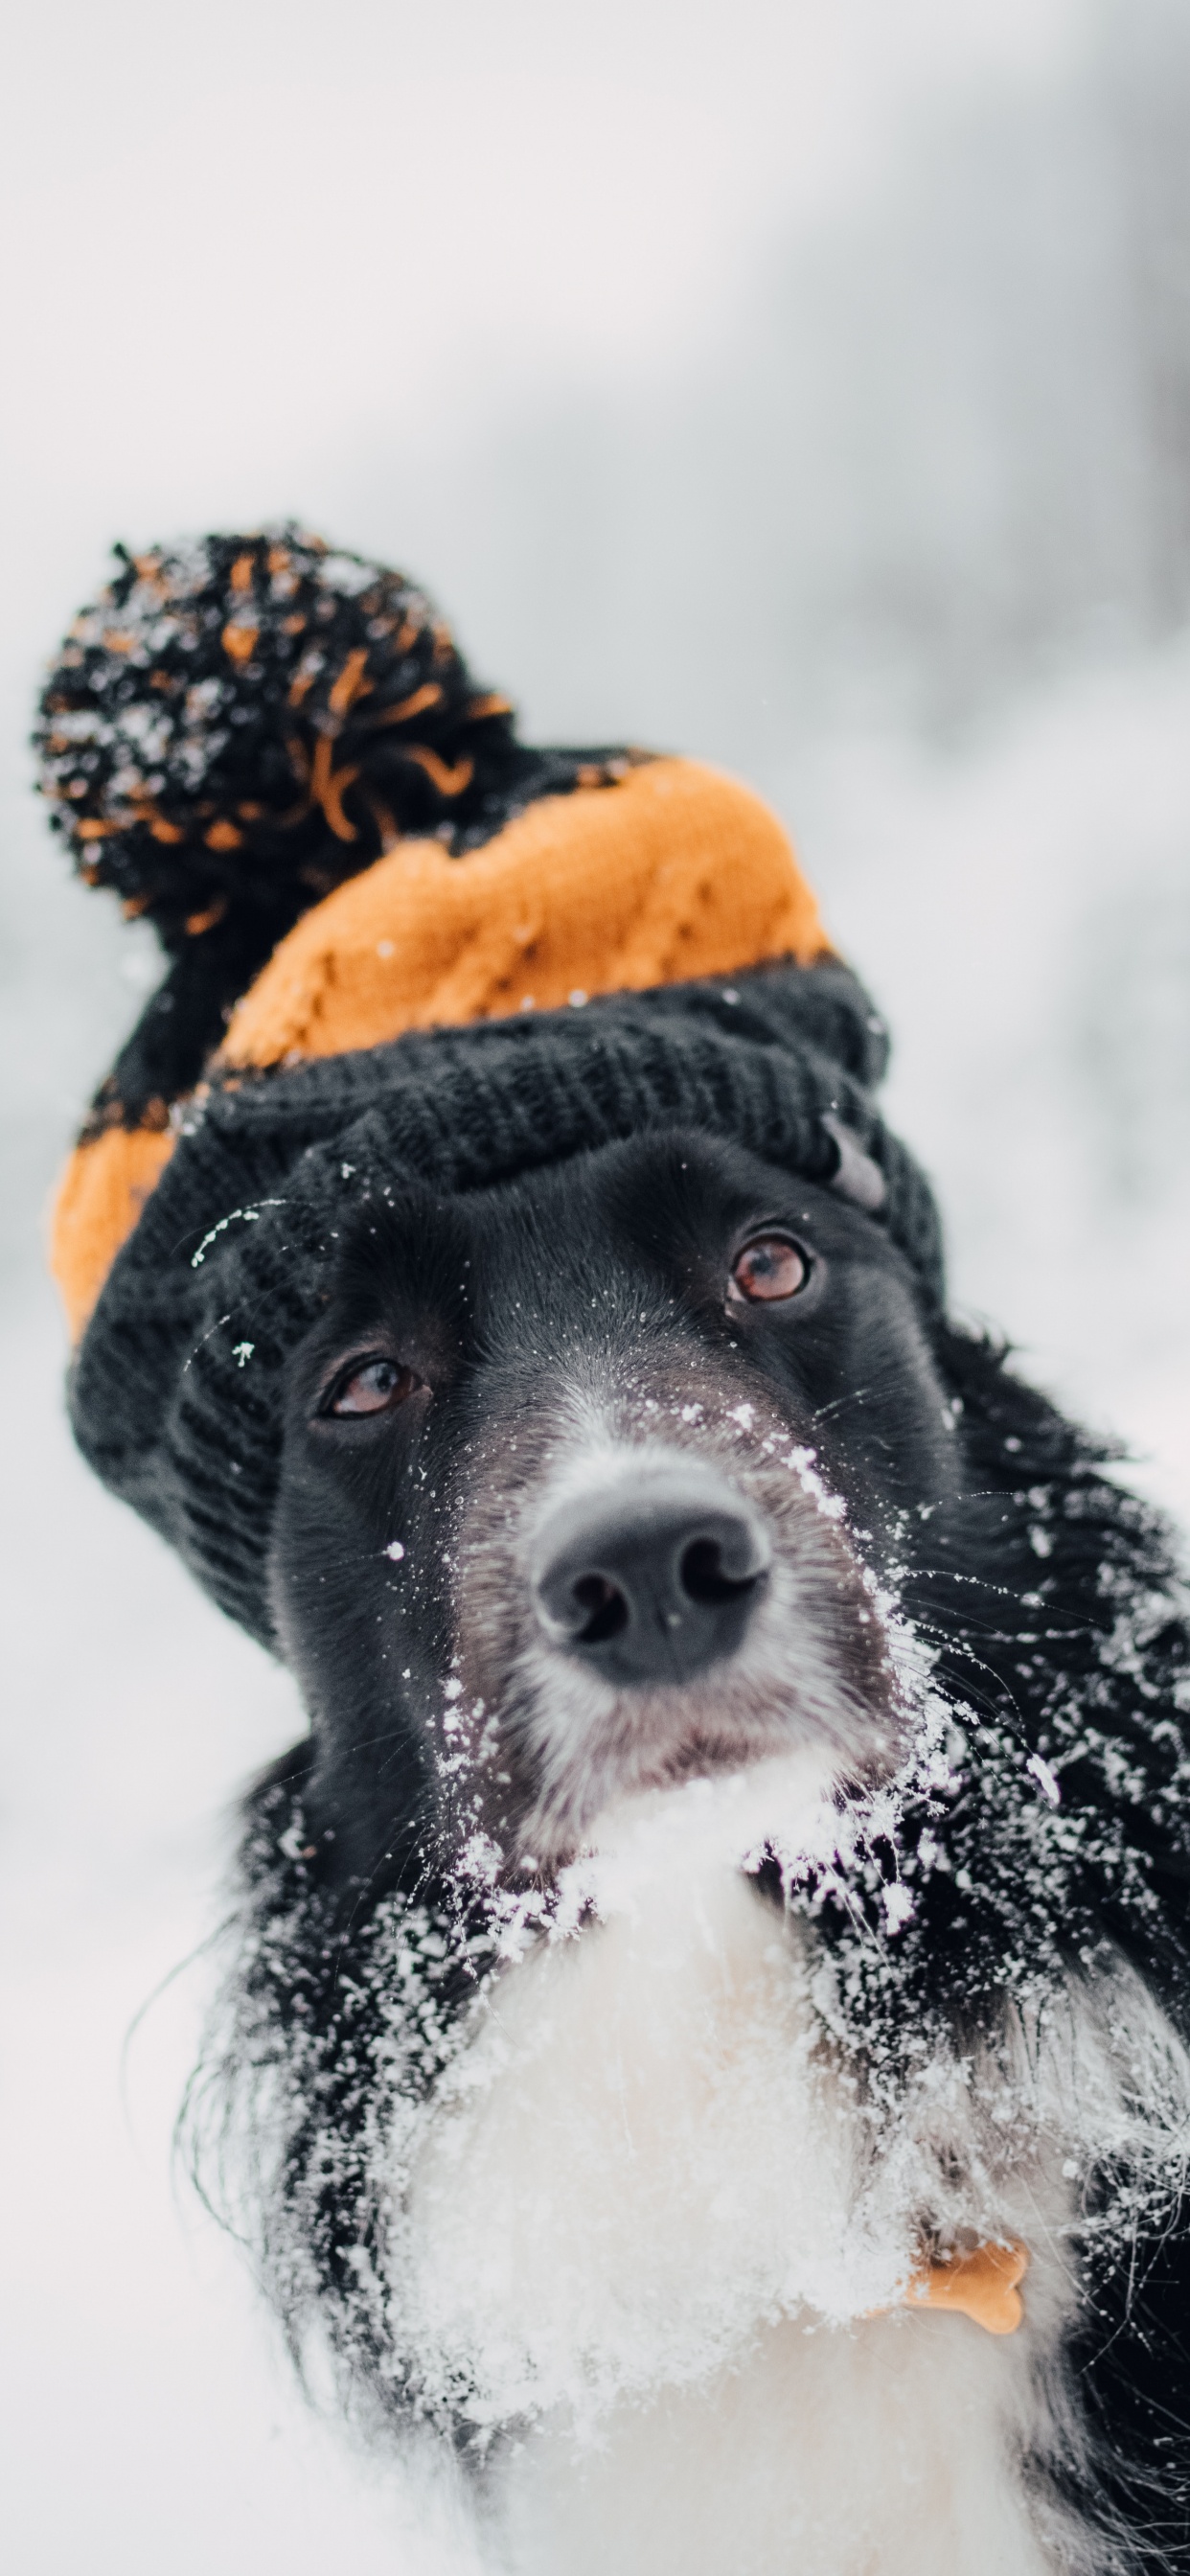 Black and White Border Collie Wearing Orange Knit Cap and Orange Knit Cap. Wallpaper in 1242x2688 Resolution